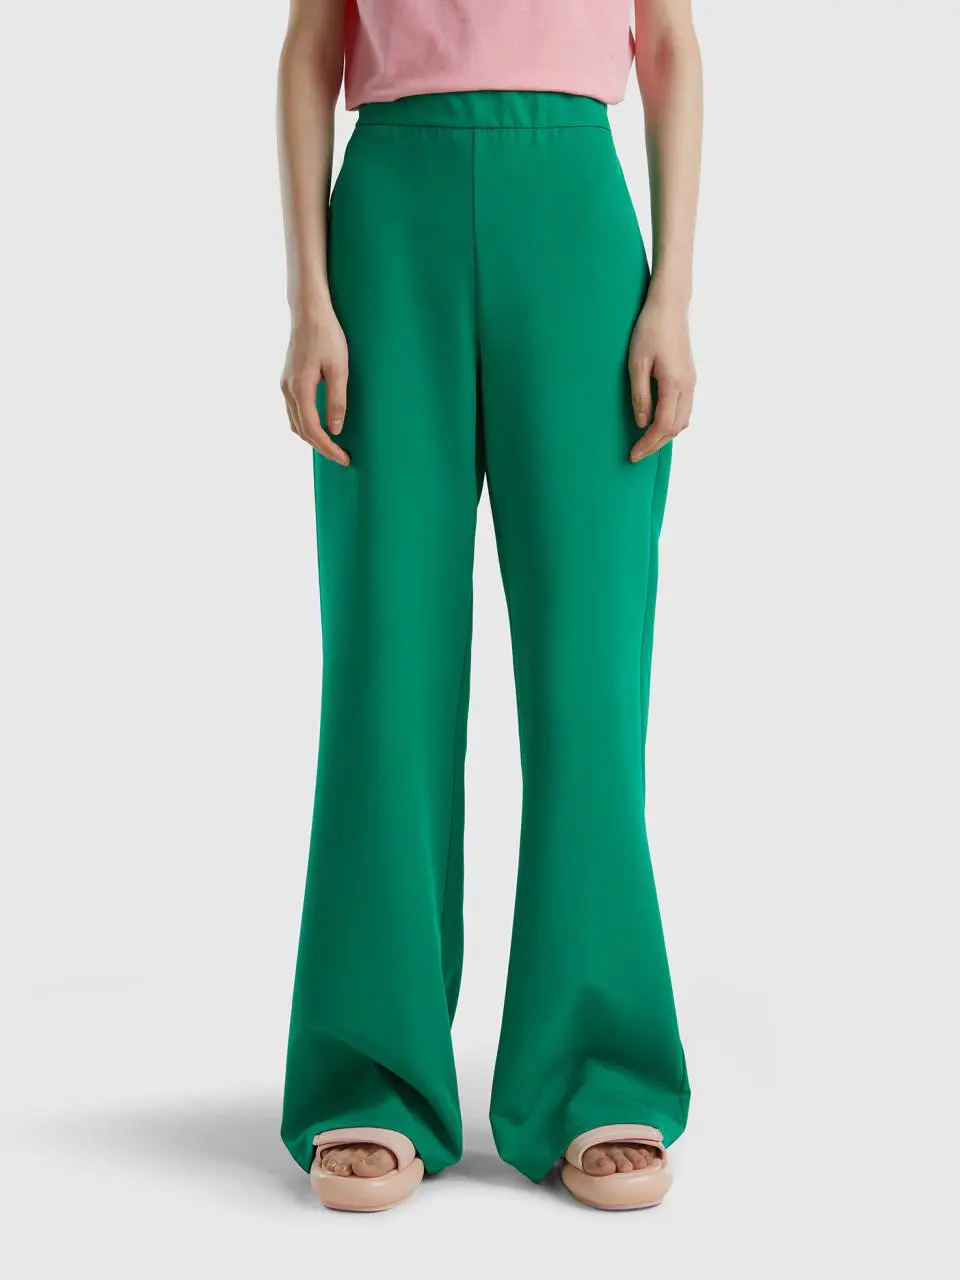 Benetton flared trousers with side zip. 1